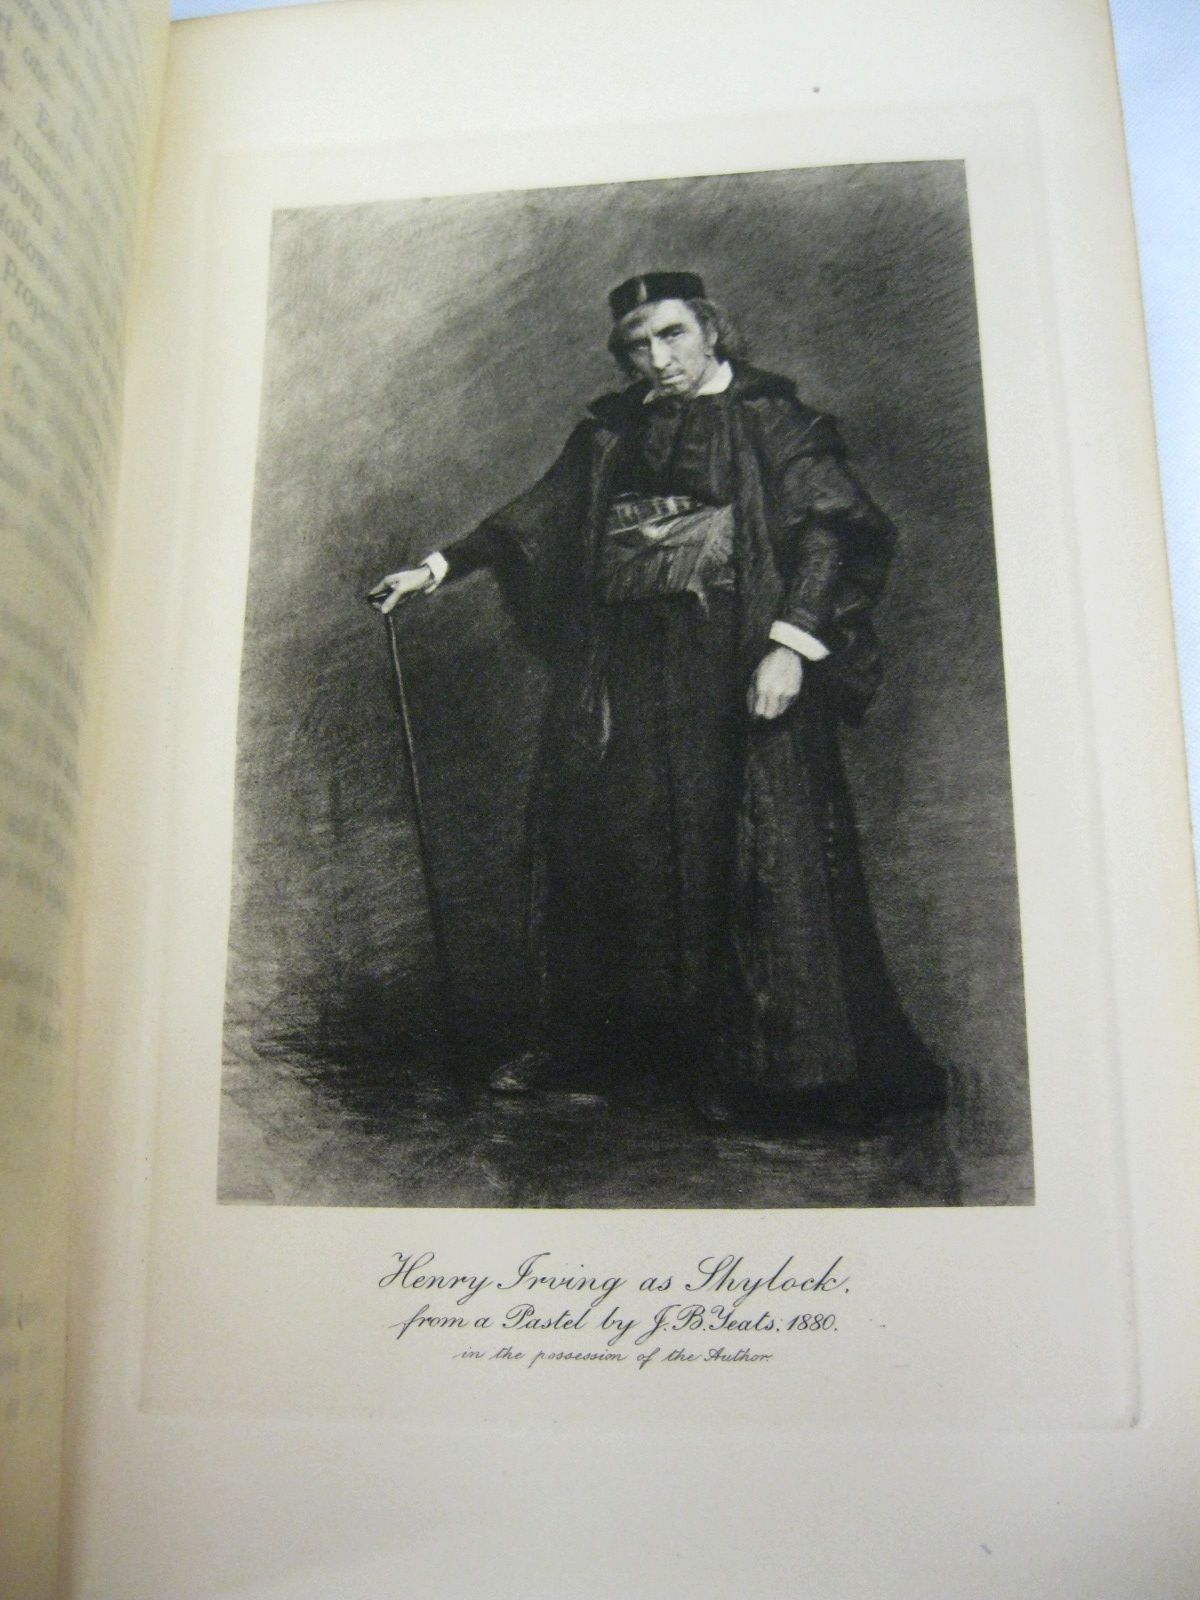 Personal Reminiscences of Henry Irving by Bram Stoker - Extra Illustrated